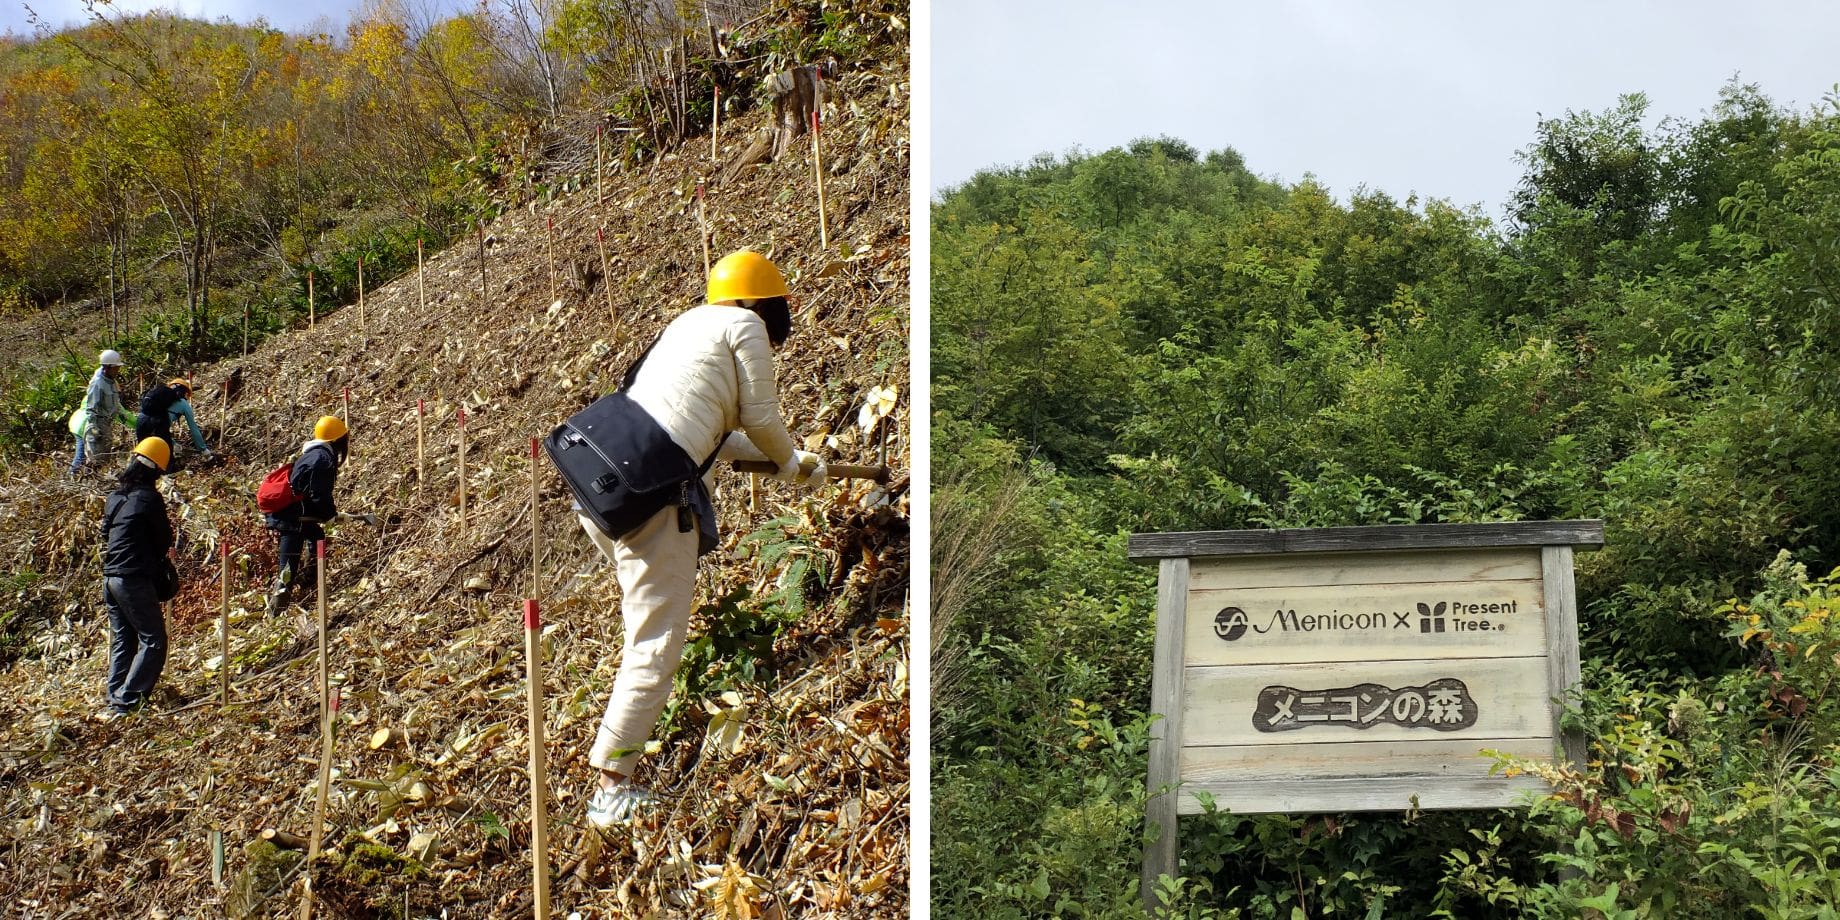 Menicon Forest: A former logging area with bare mountainsides that has been transformed over the past ten years into a forested landscape. Many Menicon employees have participated in the tree-planting activities.